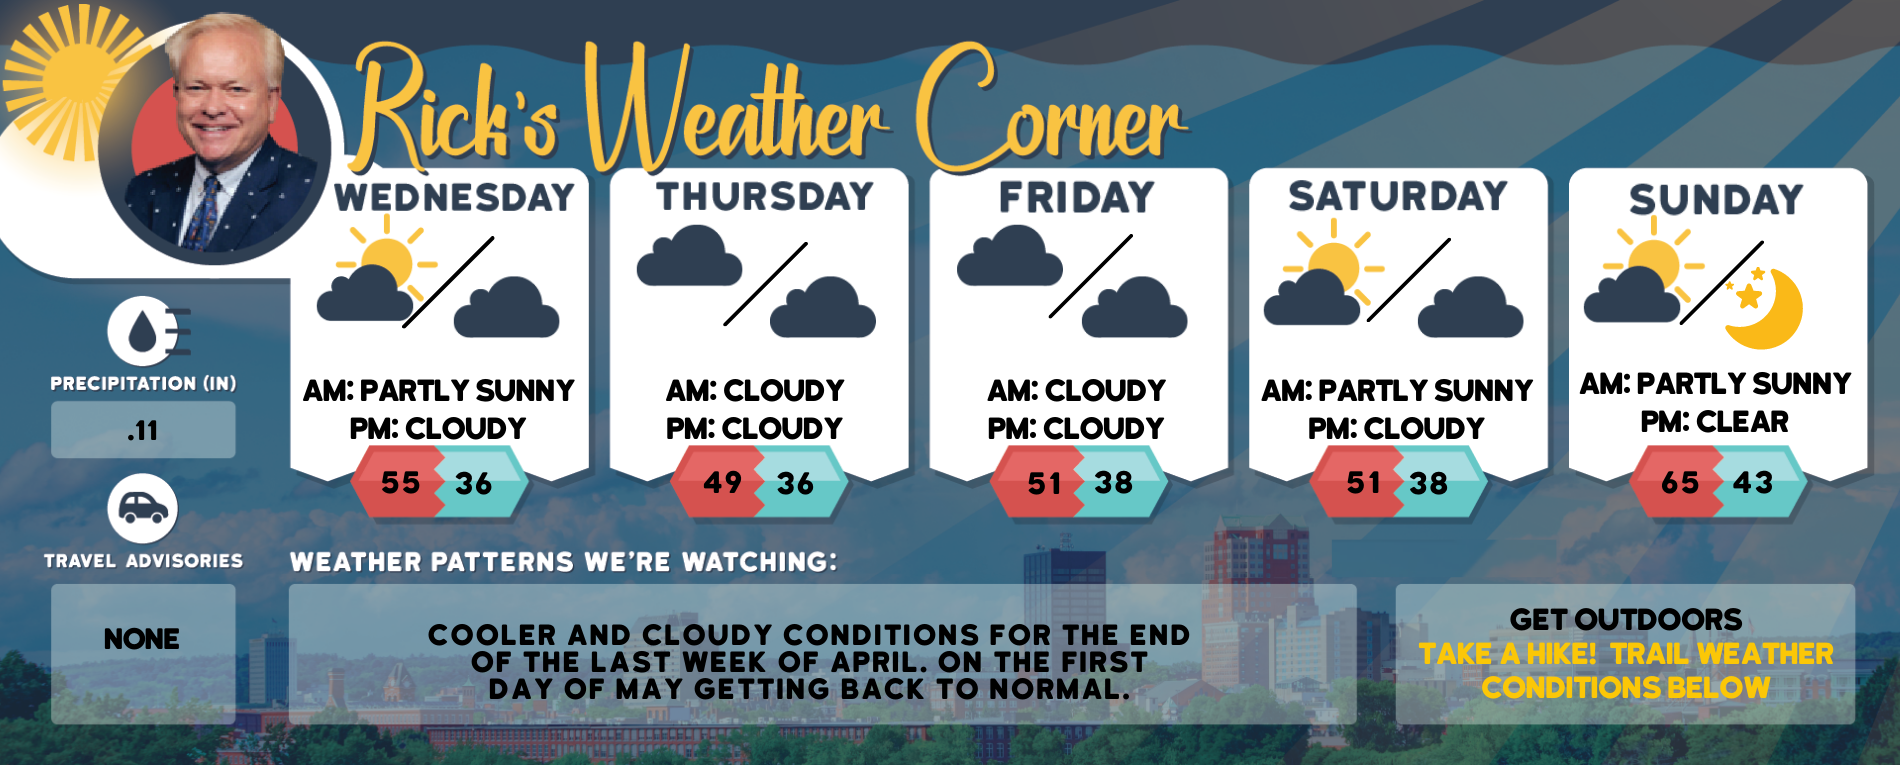 weather graphic 2 7